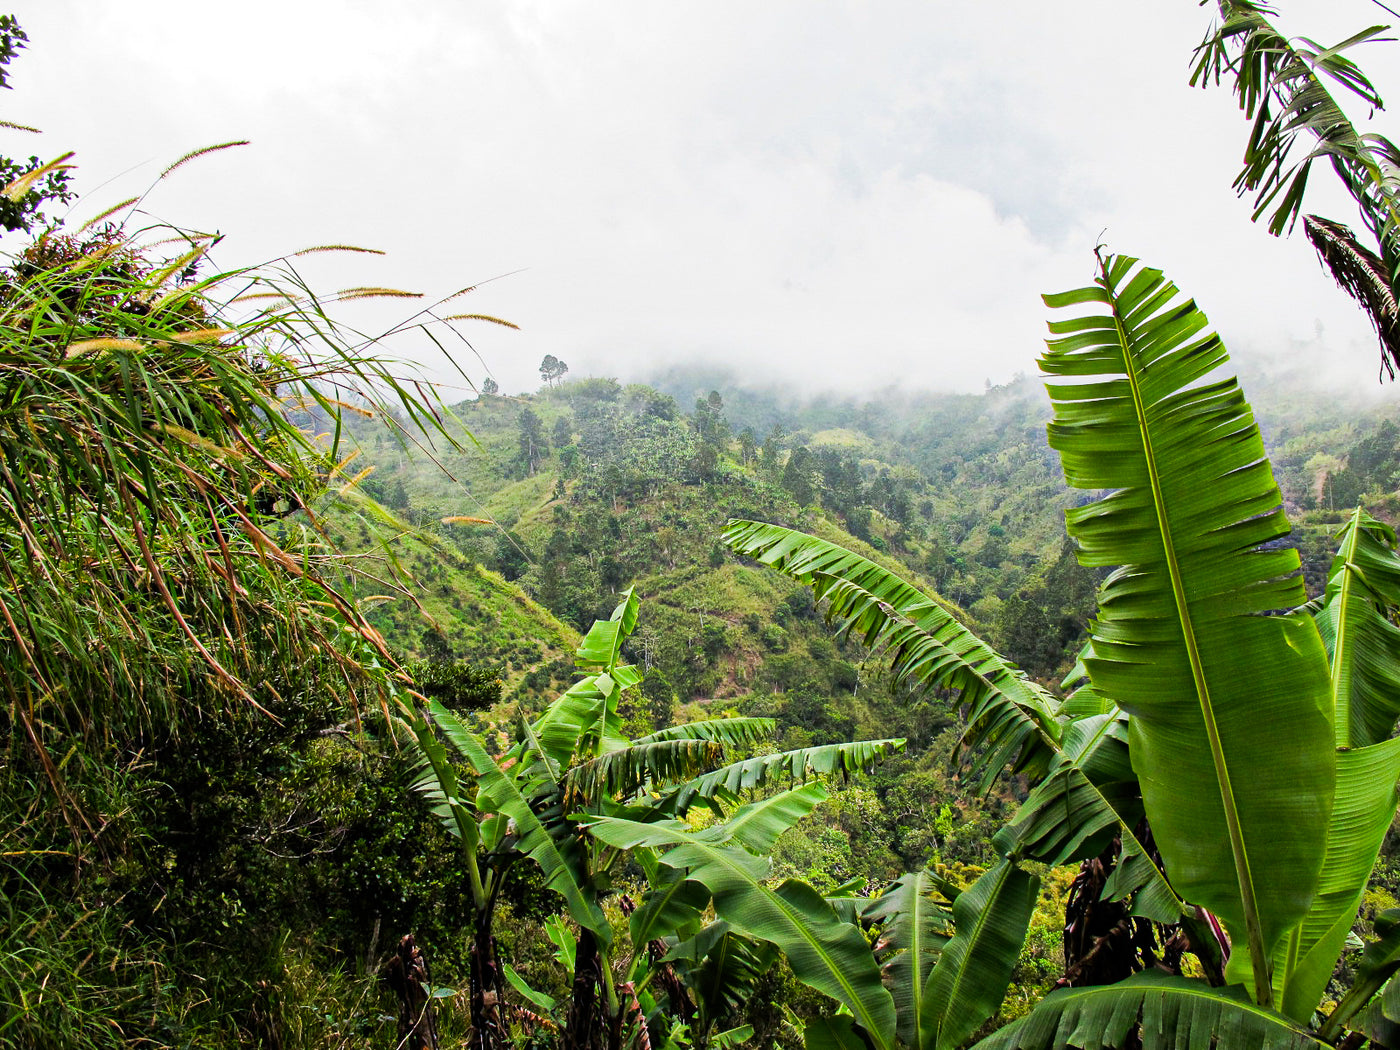 Leaves and plants in front of a misty view of the Jamaica Blue Mountains